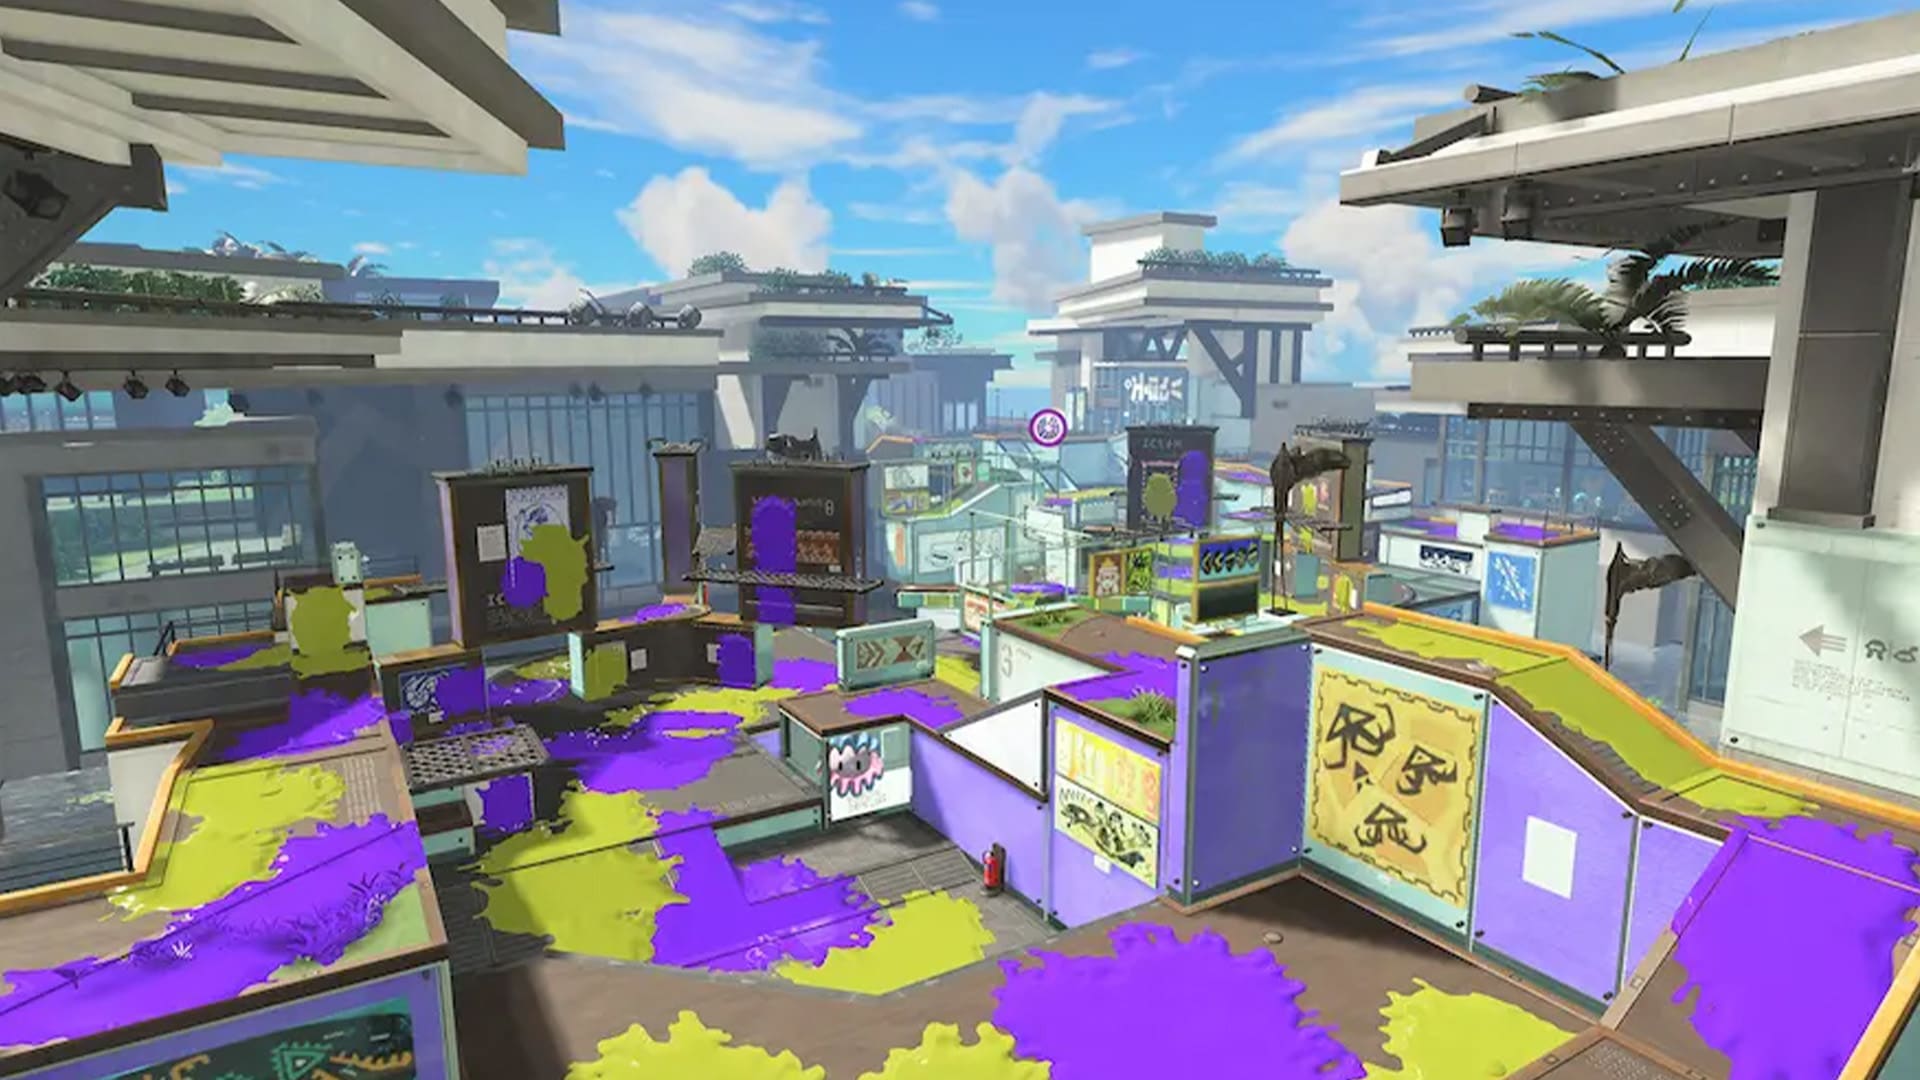 Catch up on what Splatoon 3 has to offer Screenshot 4